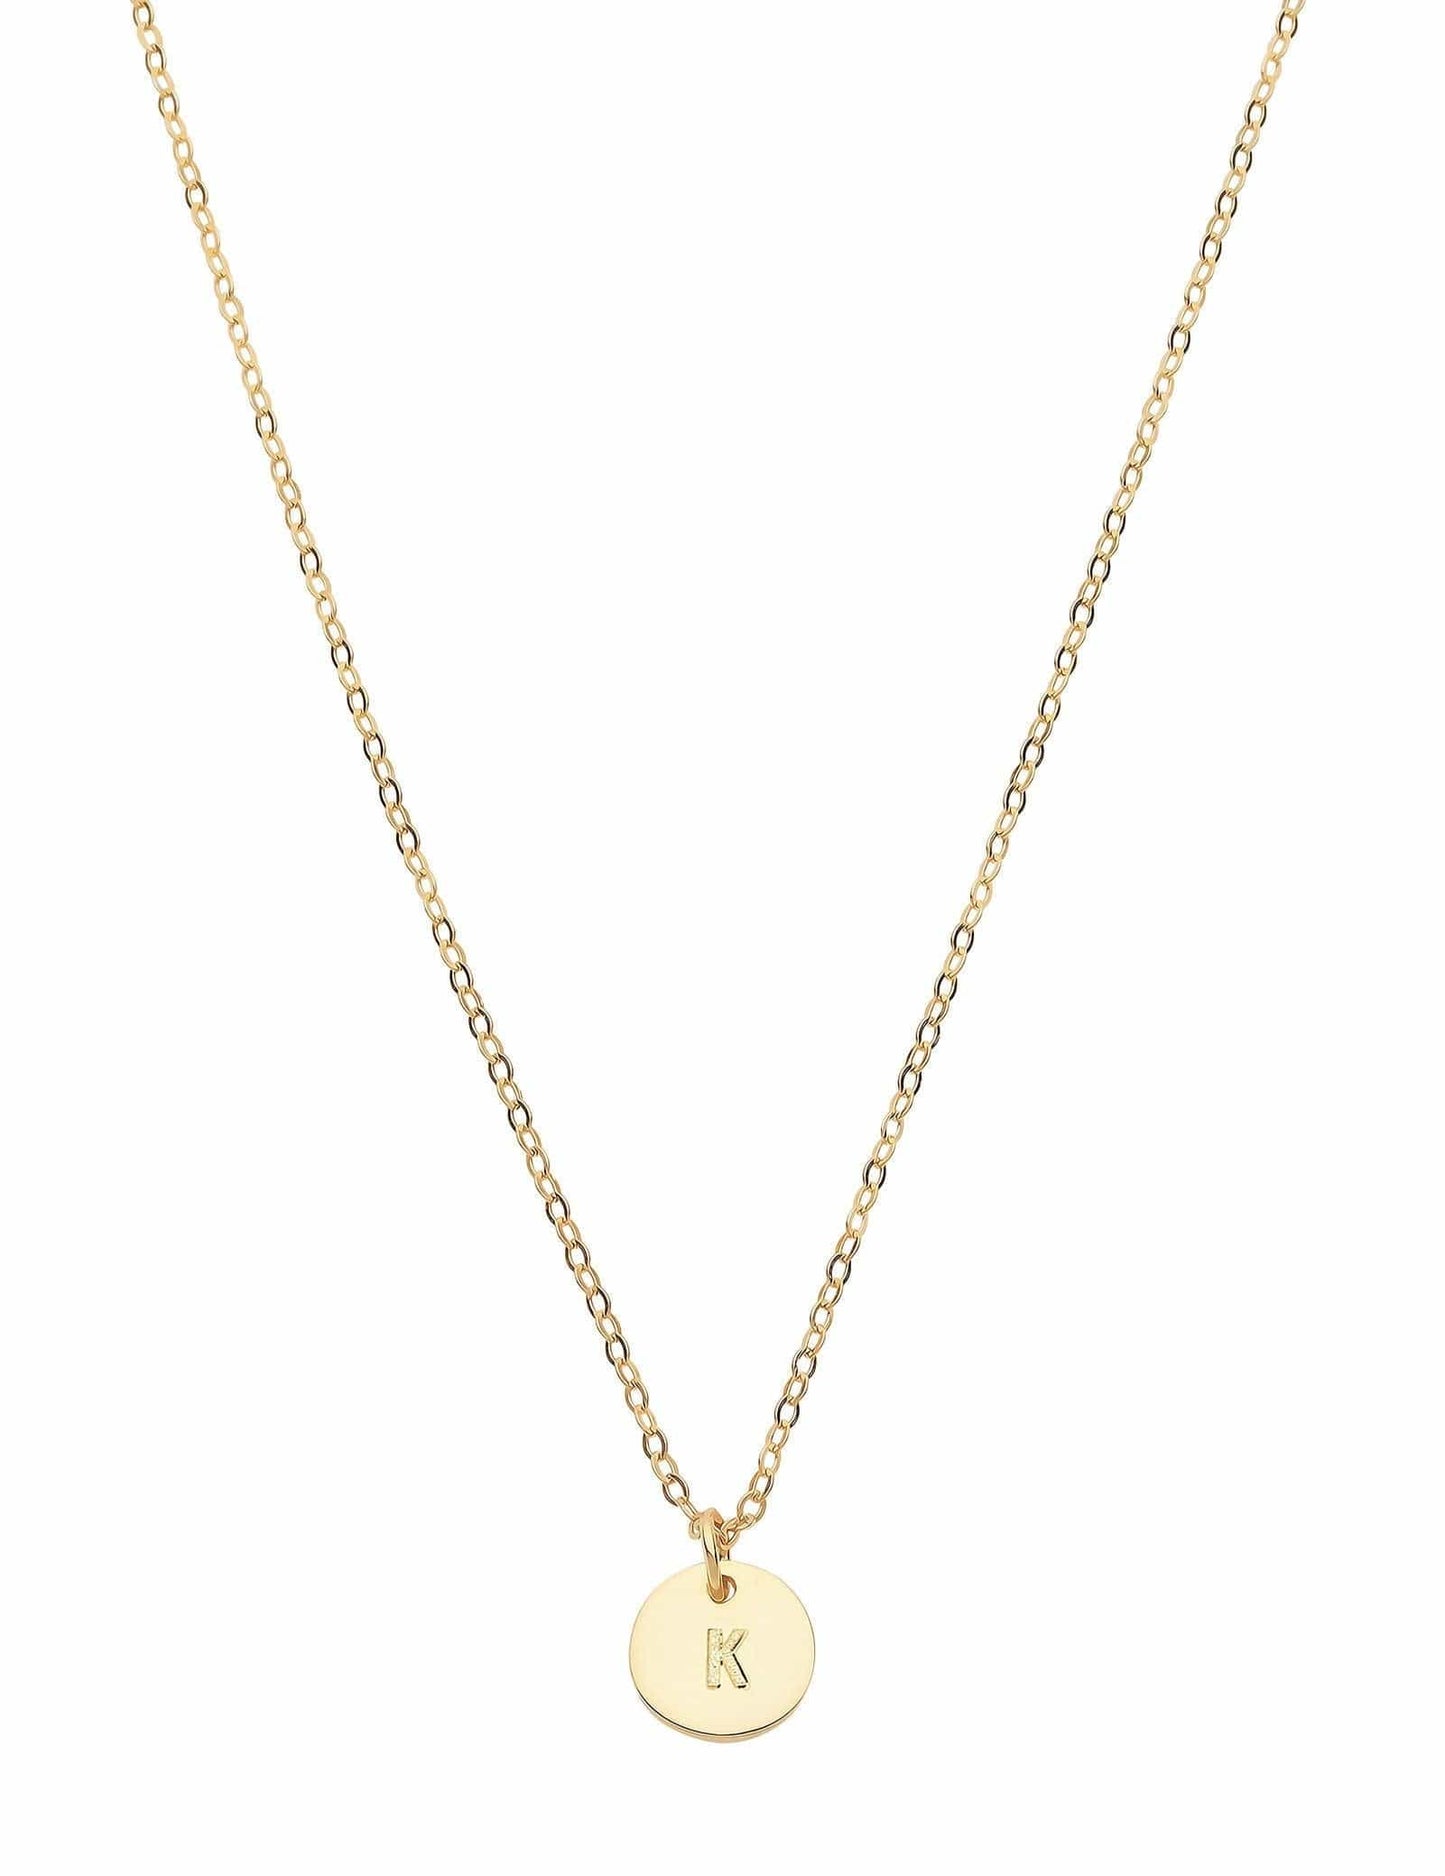 Dear Addison Yellow Gold Letter K Necklace